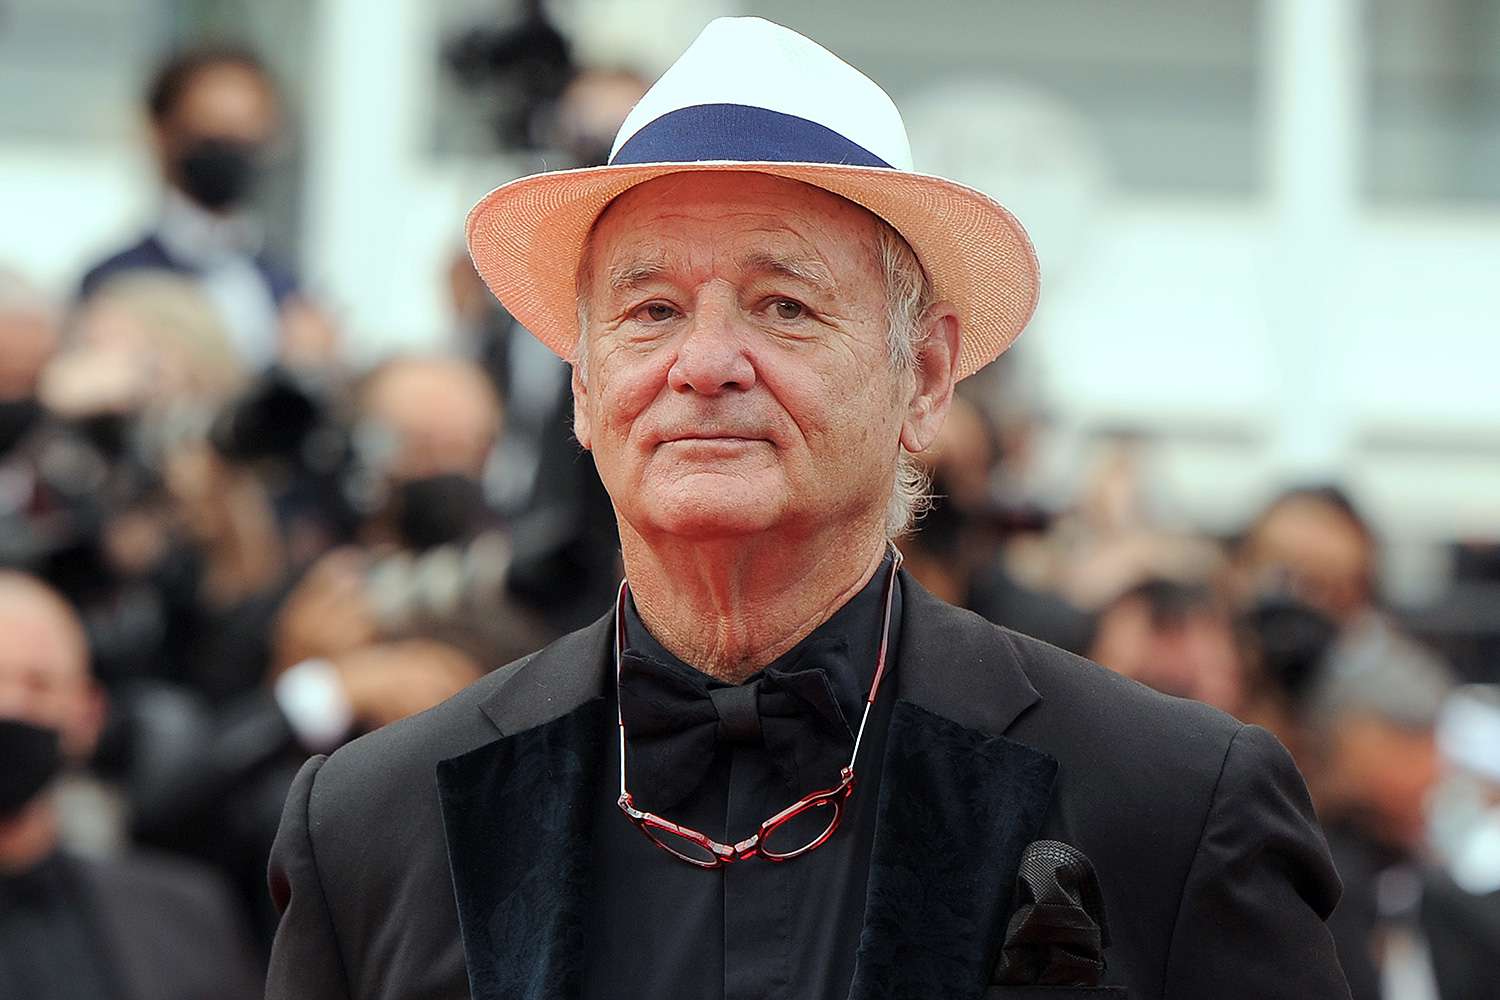 Bill Murray wearing a black suit and cap